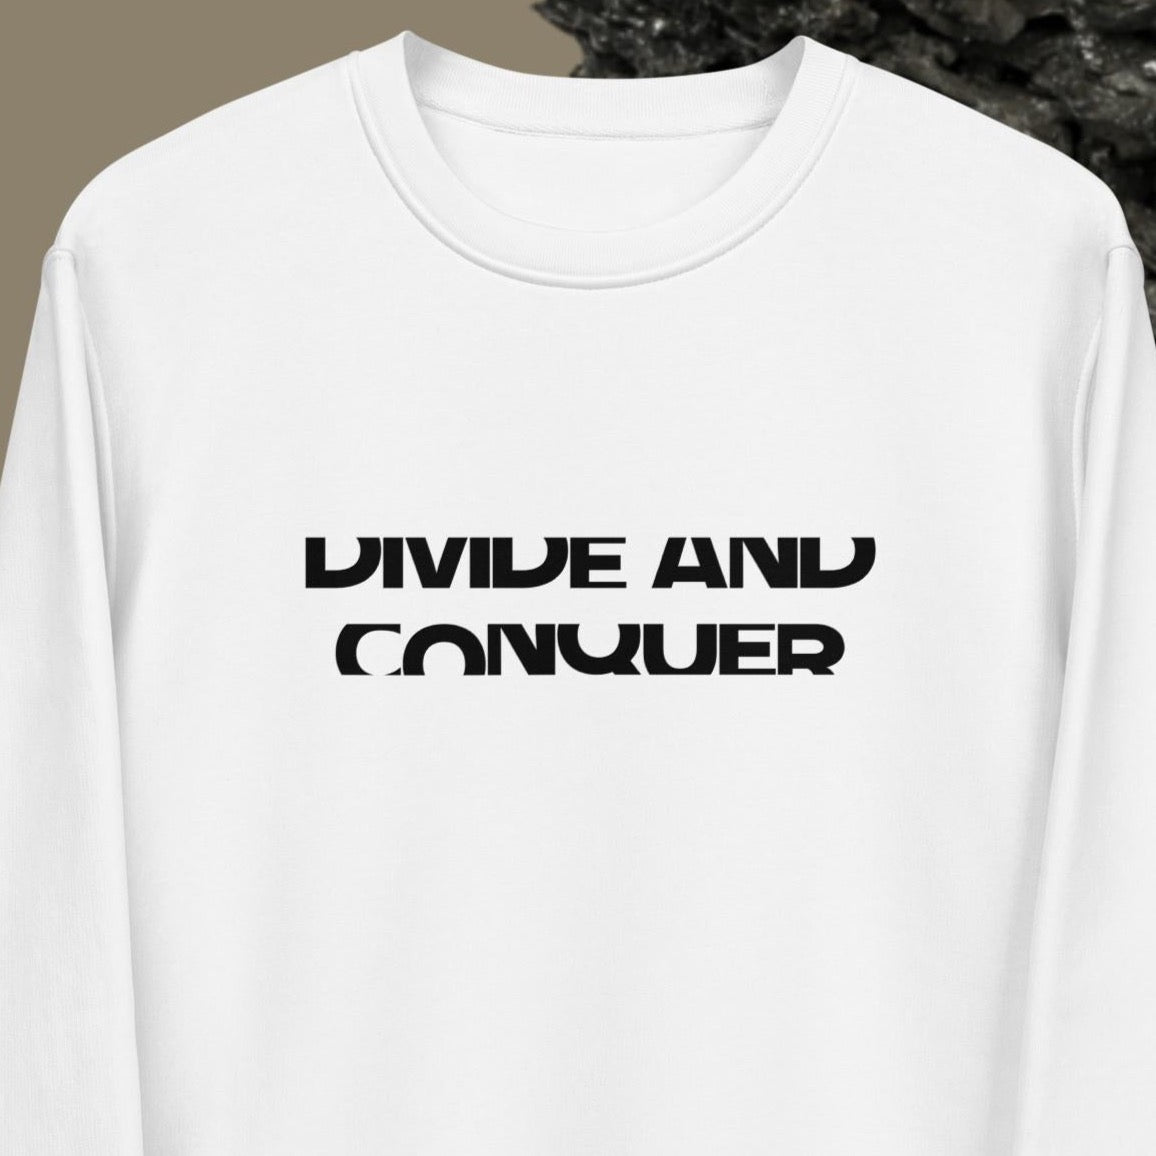 Contemporary 'Divide & Conquer' Organic Cotton Sweatshirt - Divide And Conquer